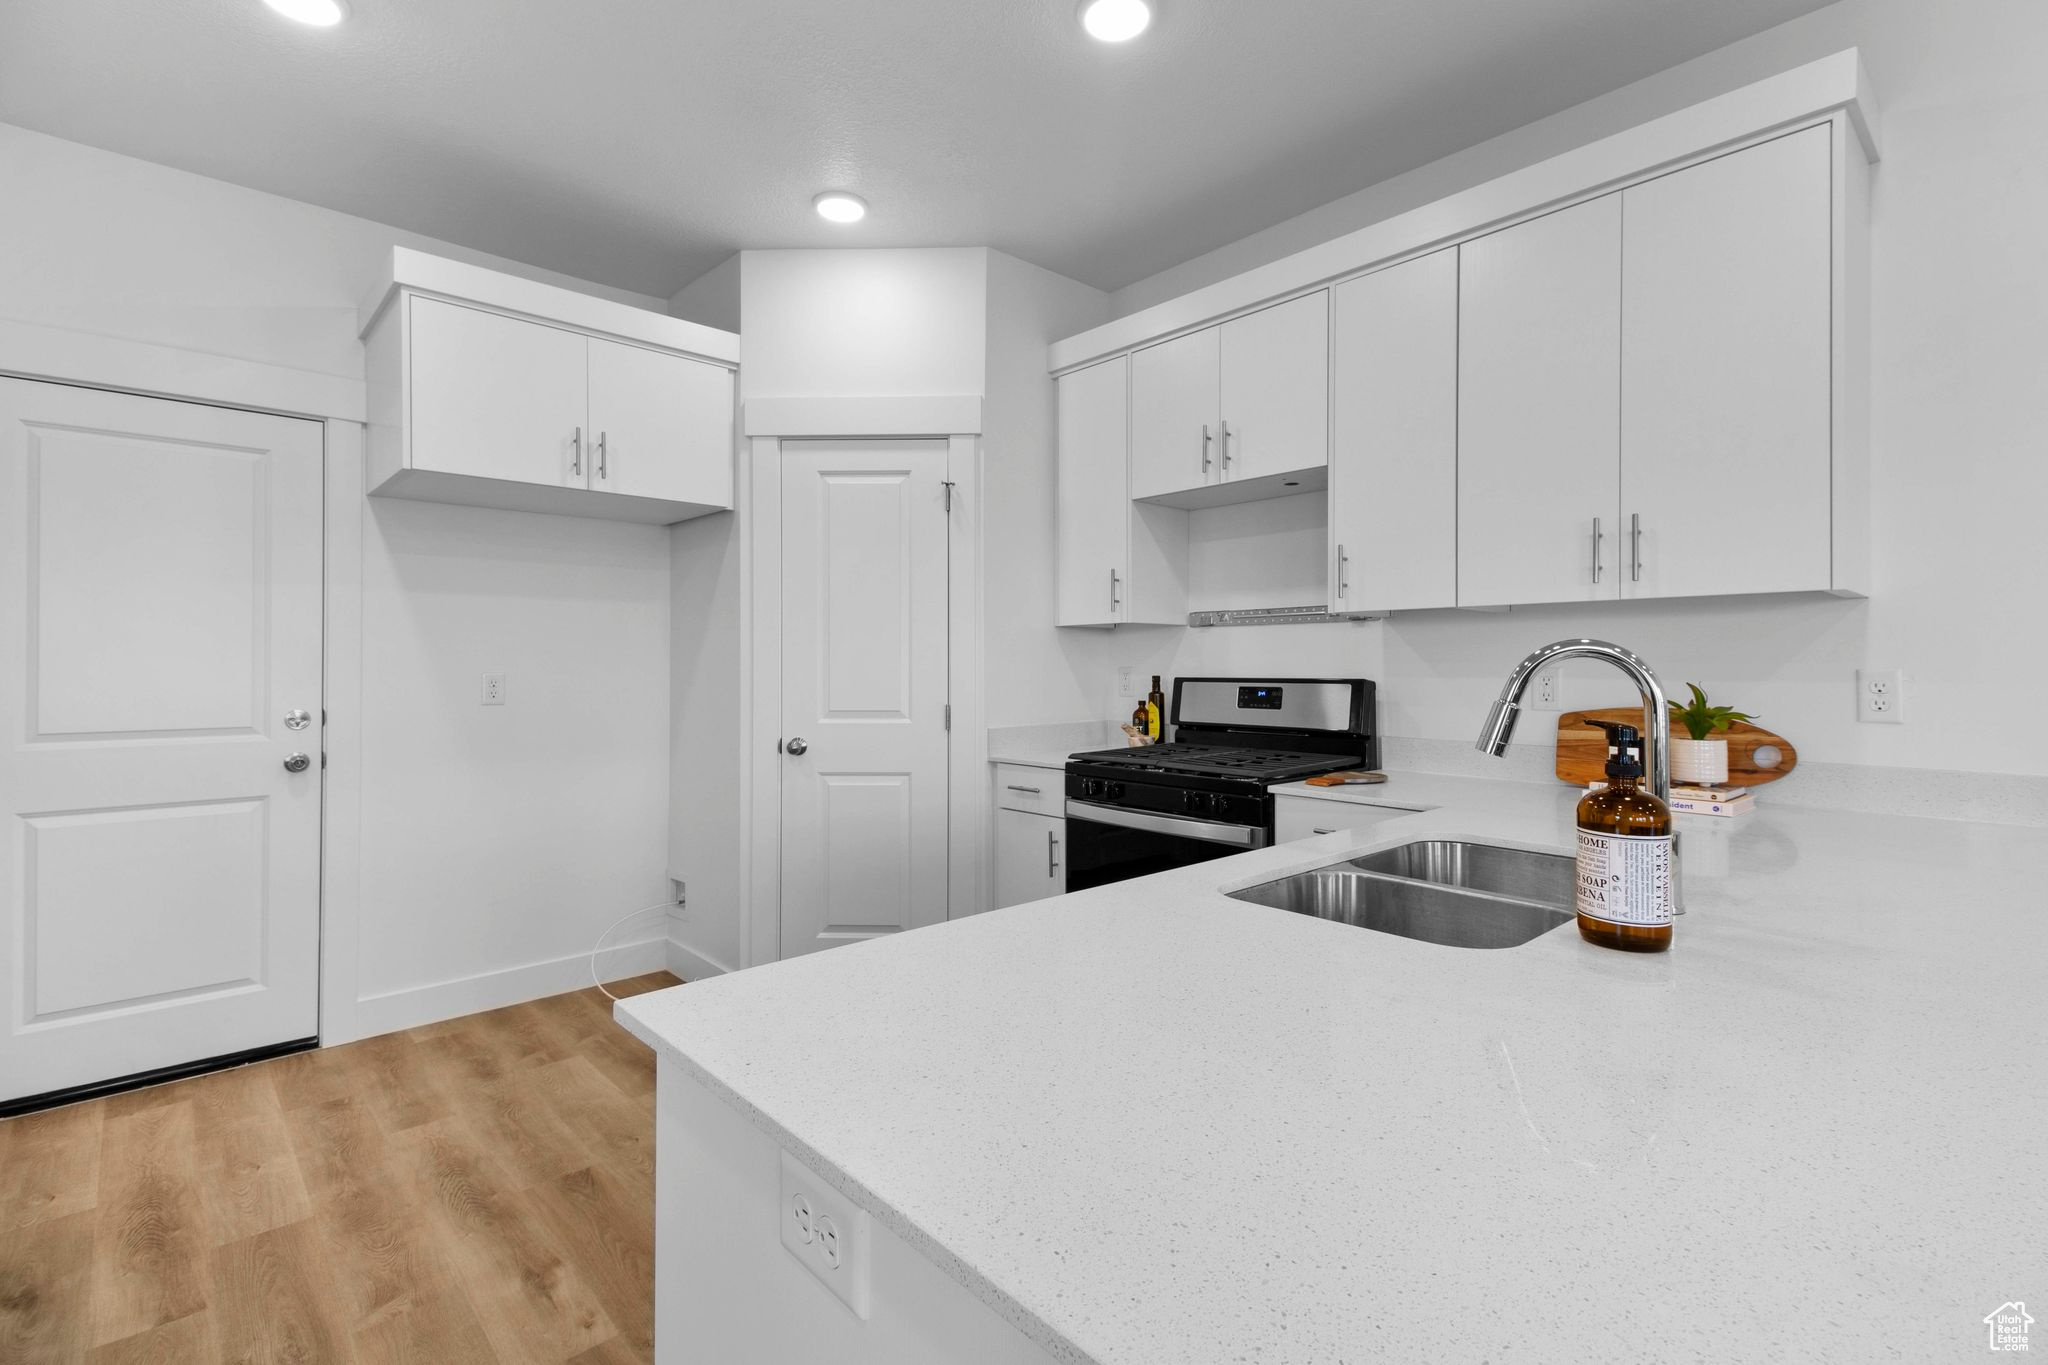 Kitchen featuring light hardwood / wood-style flooring, stainless steel gas stove, sink, and white cabinetry